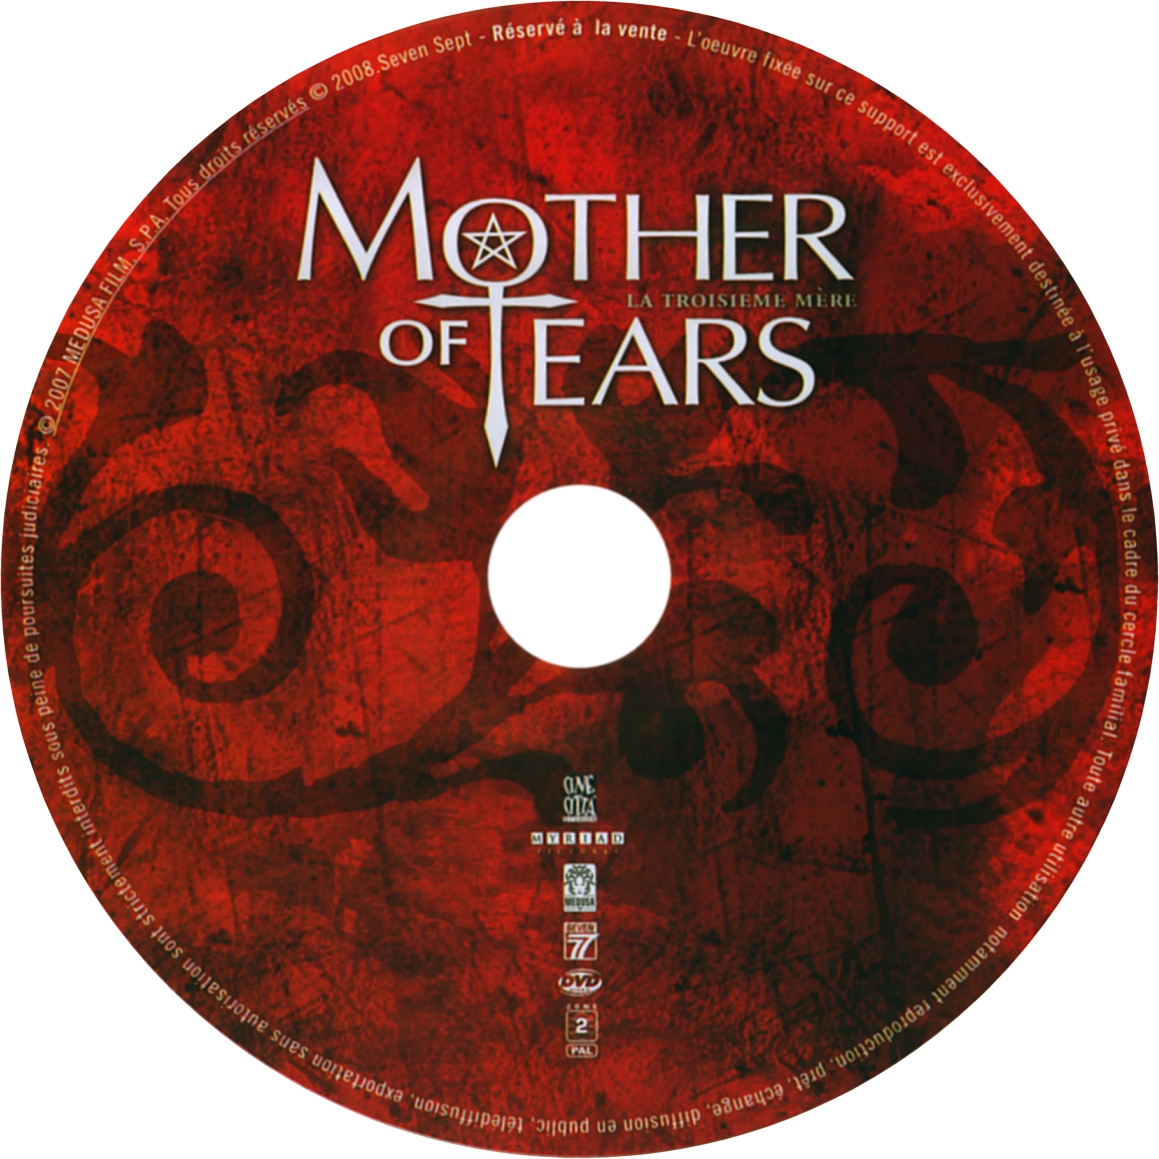 Mother of tears DVD 1